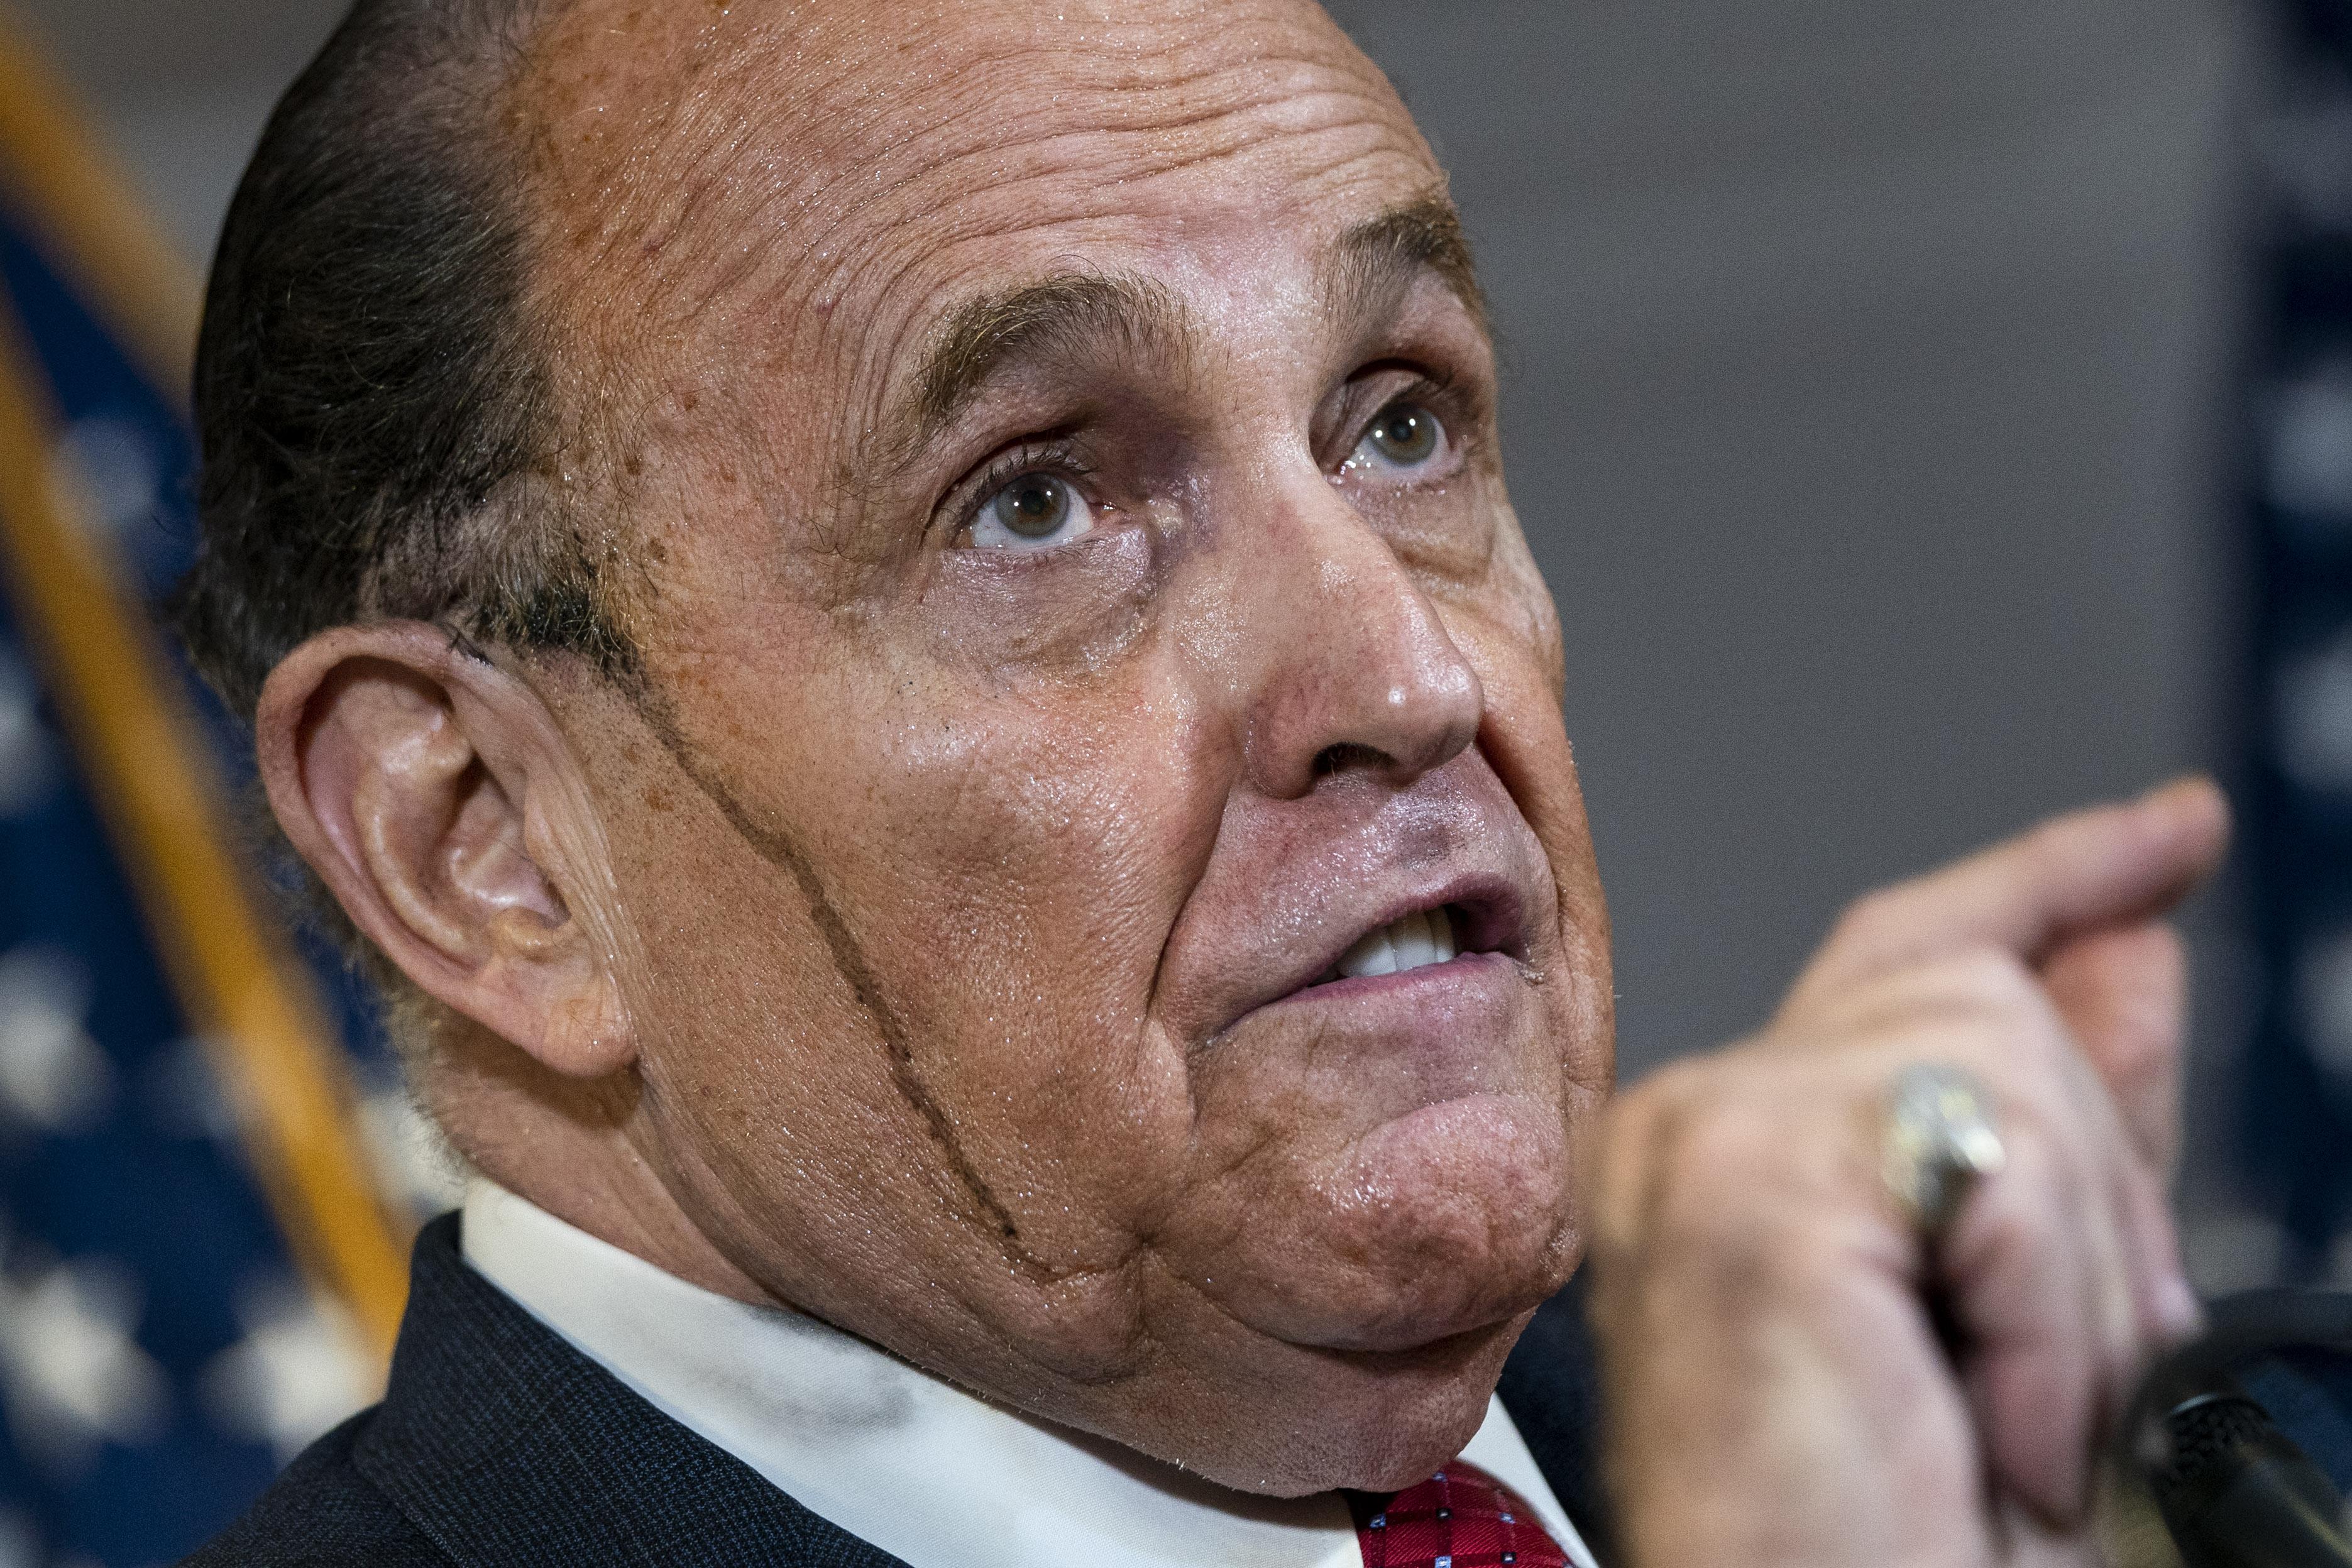 Hair coloring appears to drip down the side of Rudy Giuliani's face as he speaks and points during the press conference